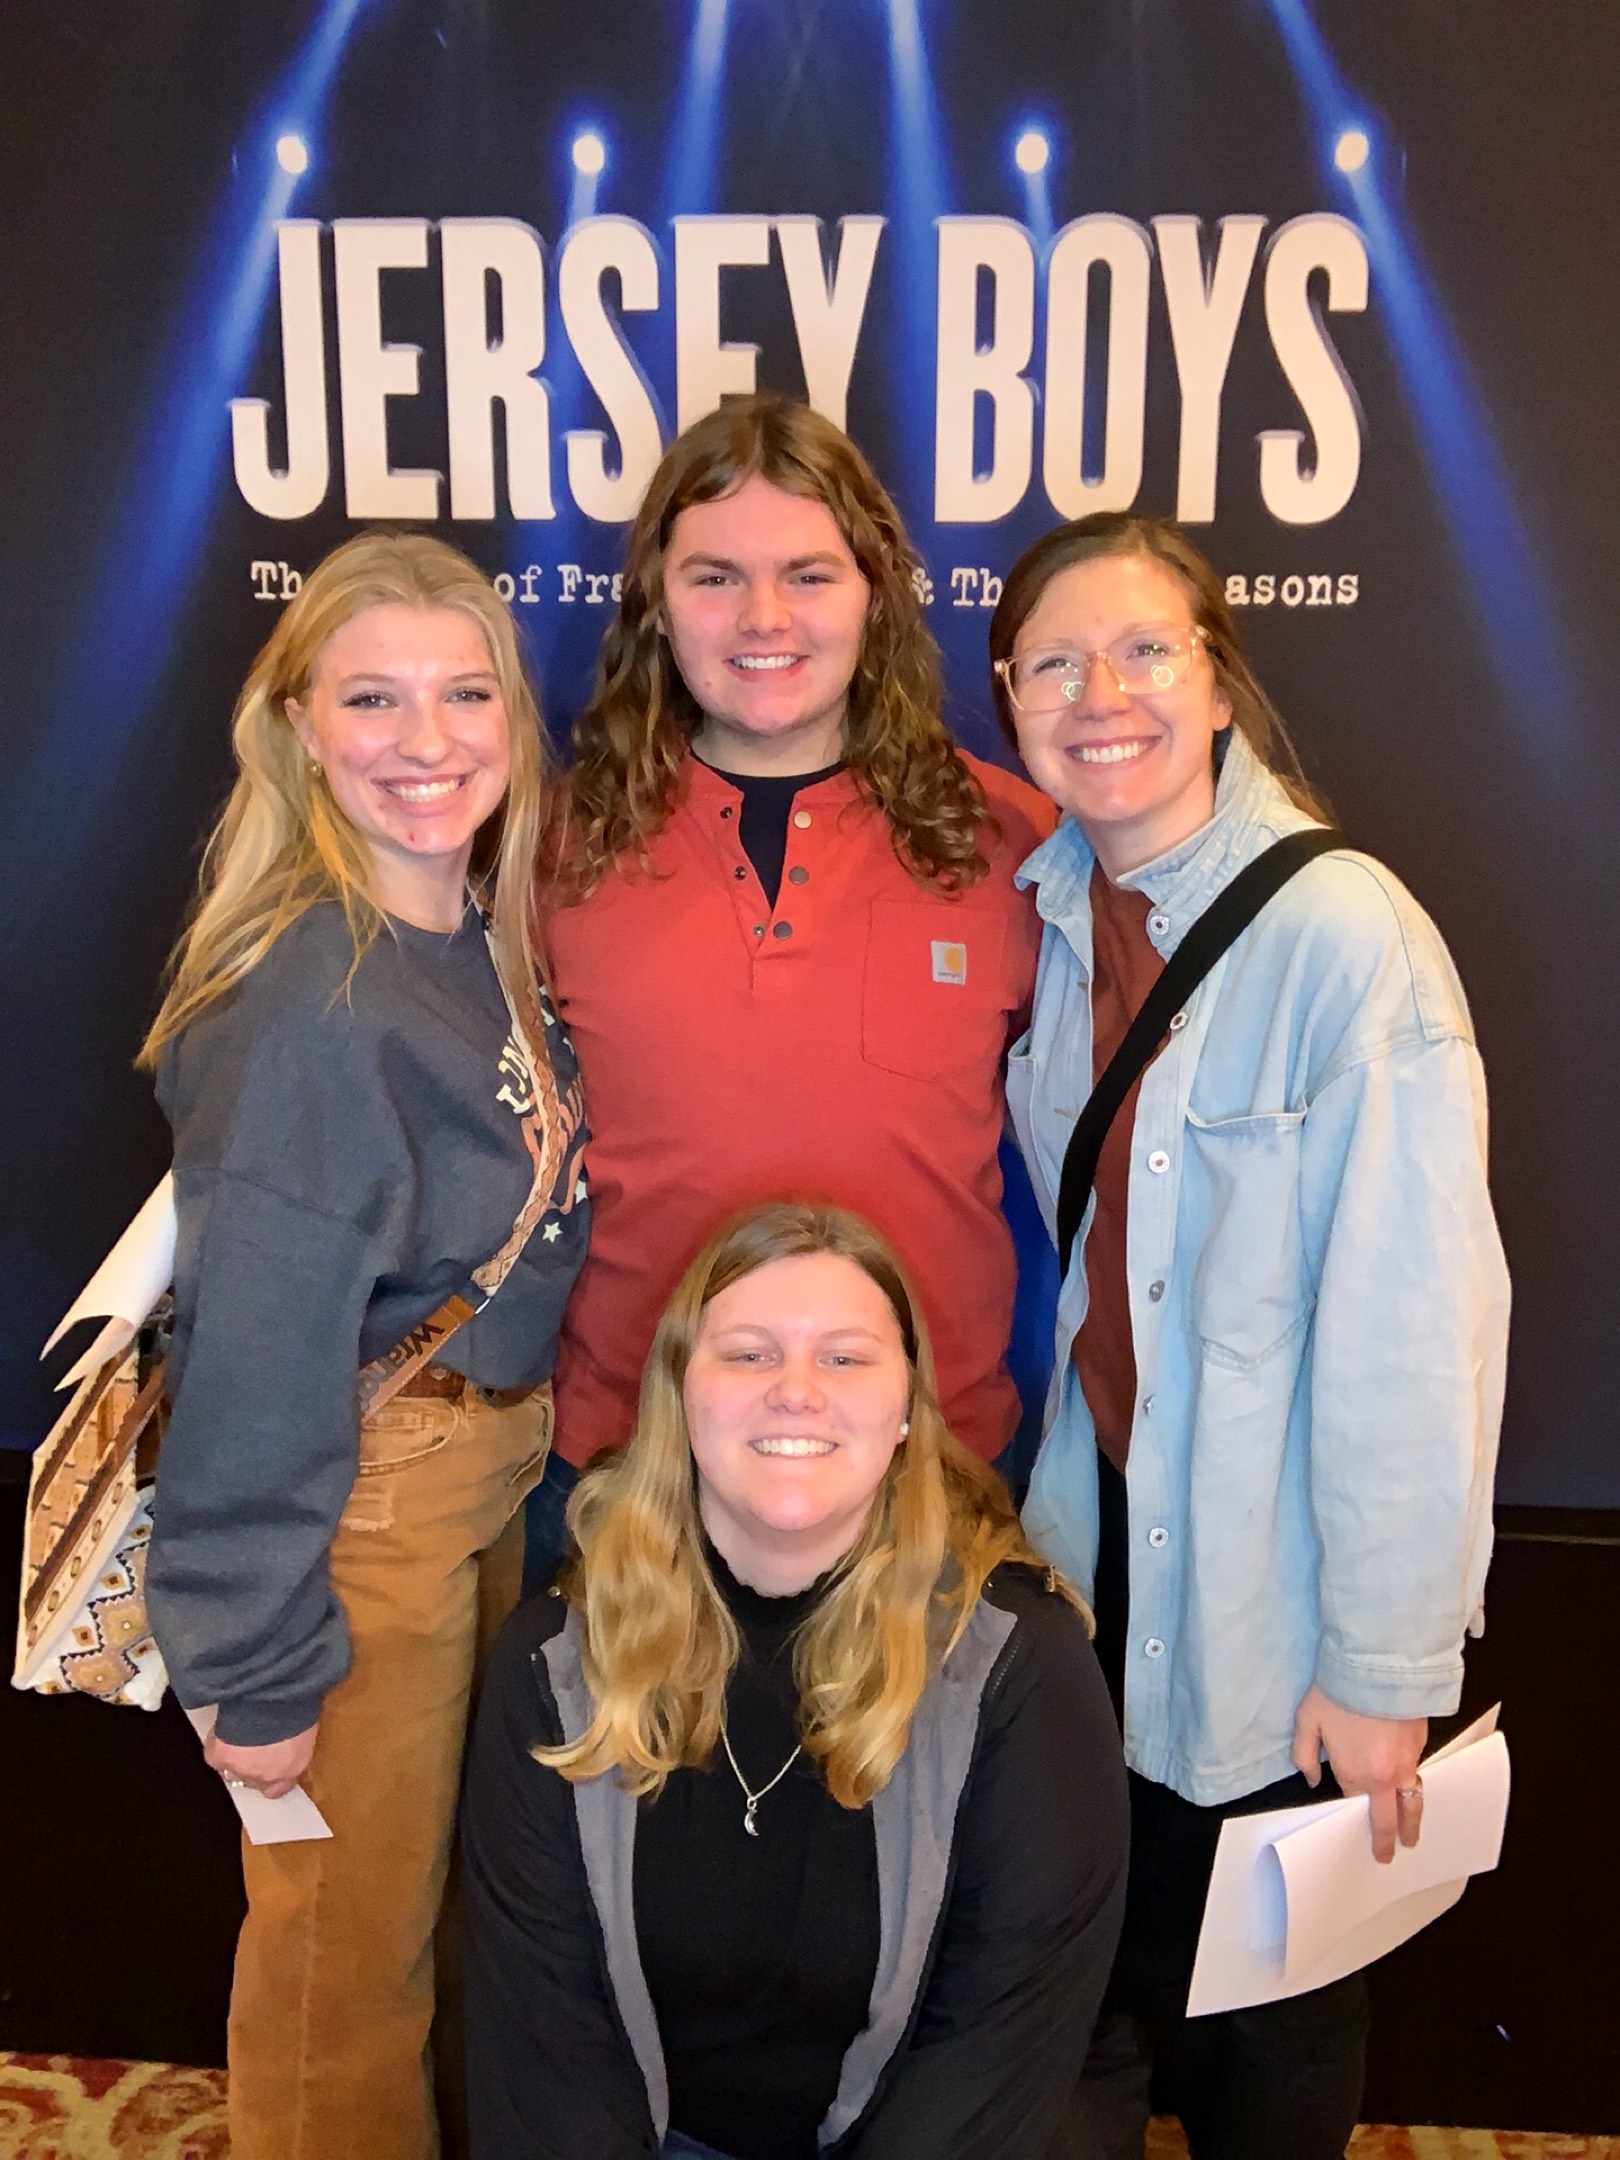 The Seniors in music attended the matinee performance of "Jersey Boys" at the Chanhassen Dinner Theatre in Chanhassen, MN on February 21st.